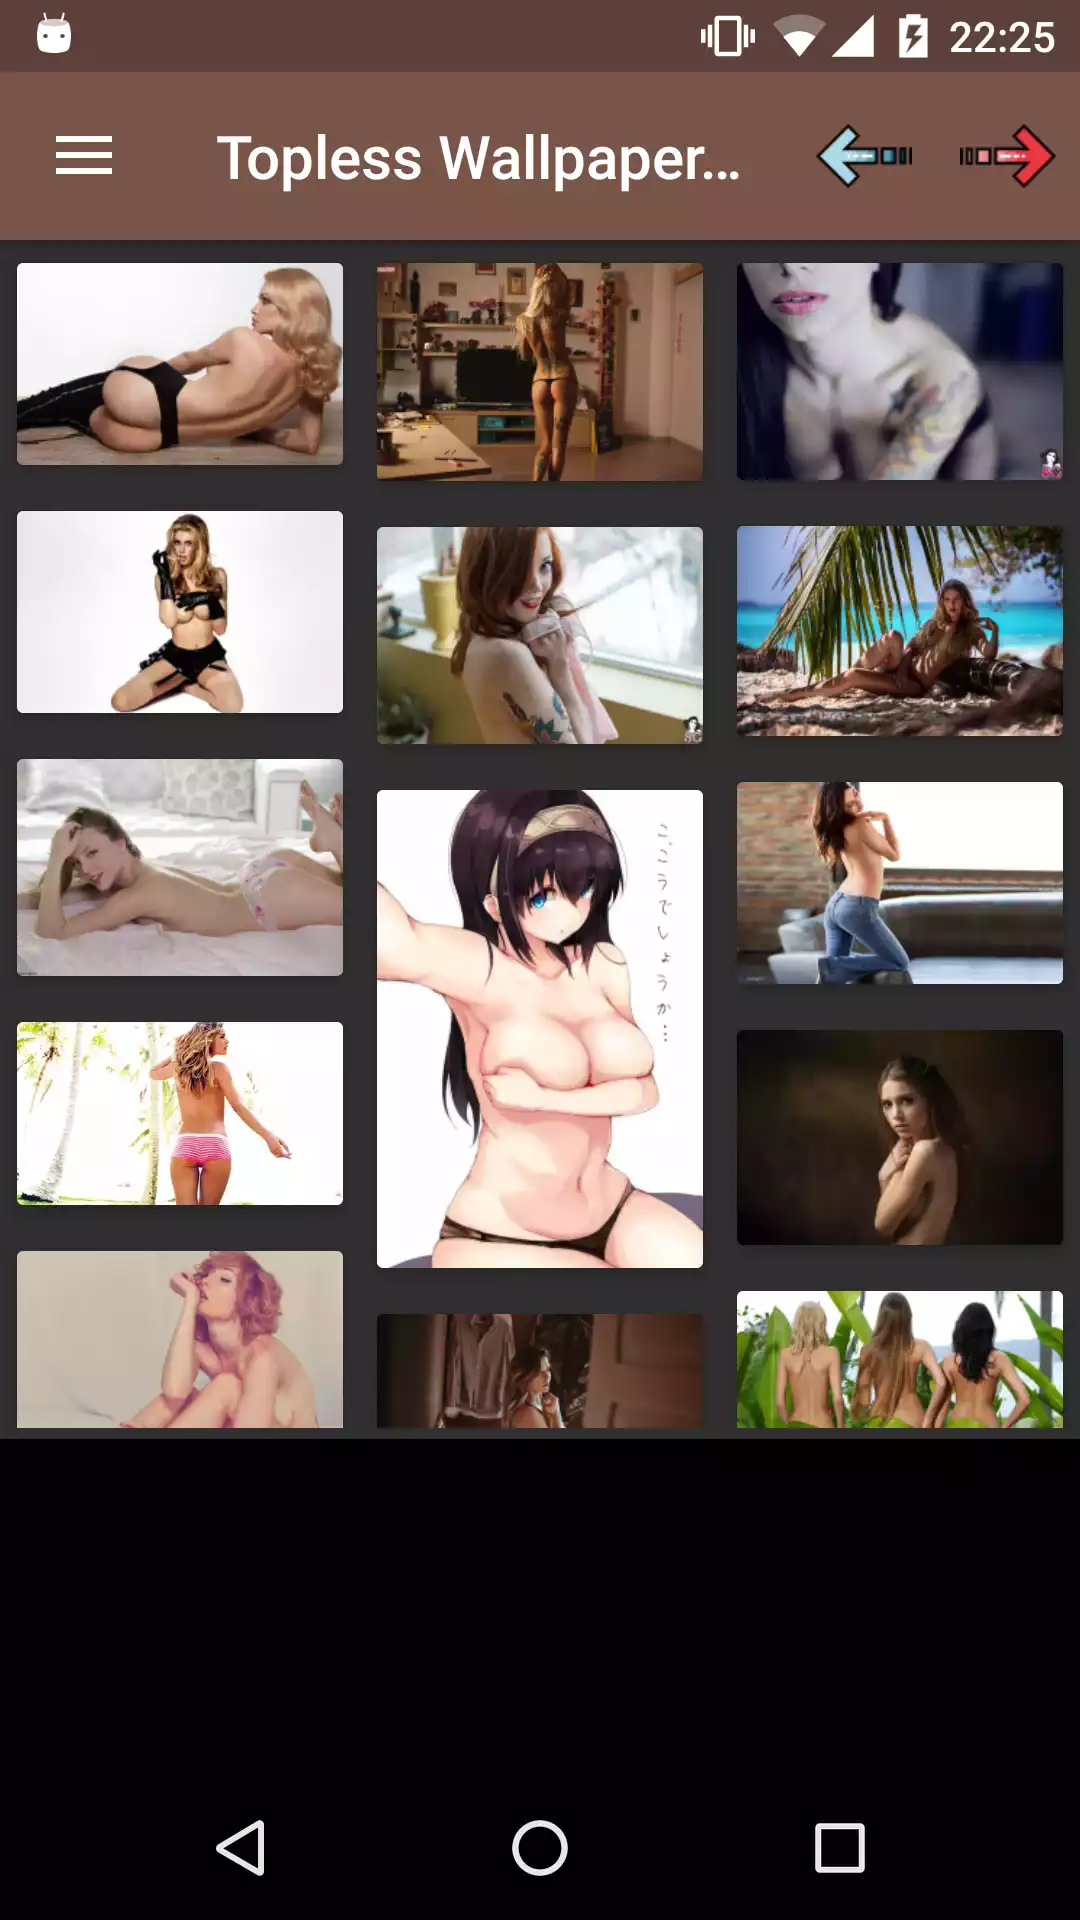 Topless backgrounds anoko,oshiri,wallpapers,watching,pornstars,irerare,mainichi,apps,photo,erotic,android,download,zecchou,adult,femboy,nando,pictures,free,sexy,for,mono,backgrounds,ana,manga,teen,butta,tassuru,pic,picture,porn,hentai